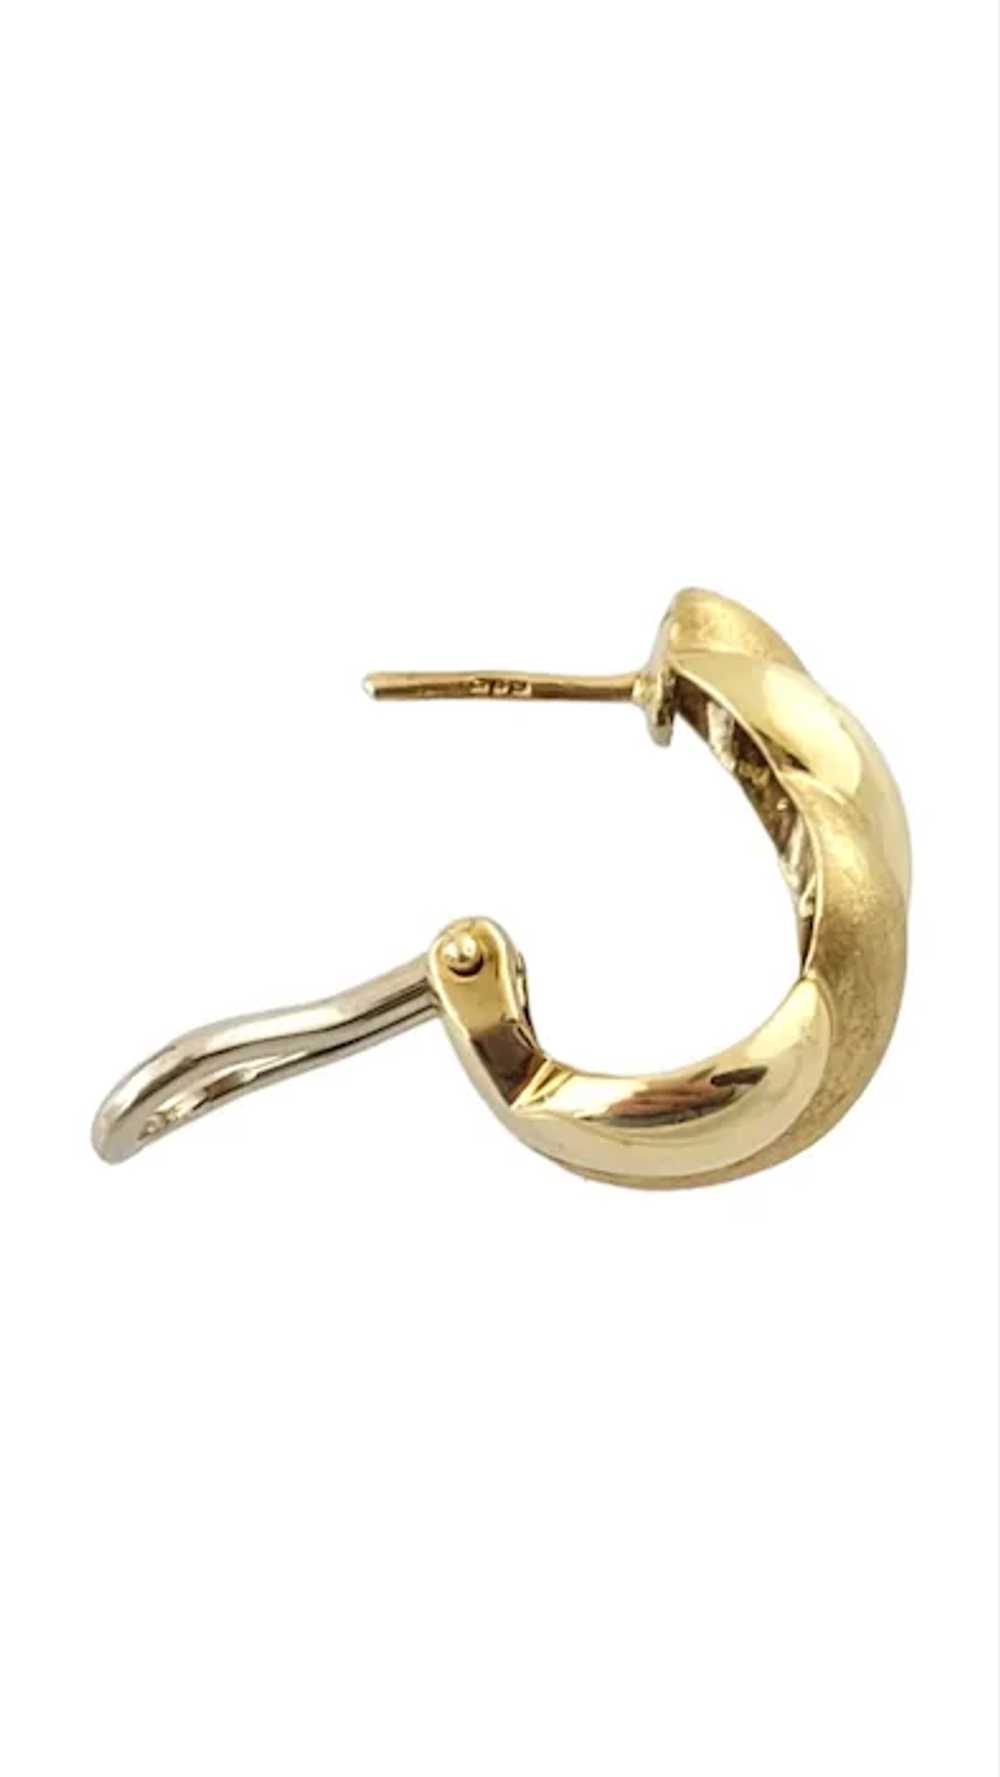 Vintage 14K Yellow Gold Twisted Cuff Earrings - image 3